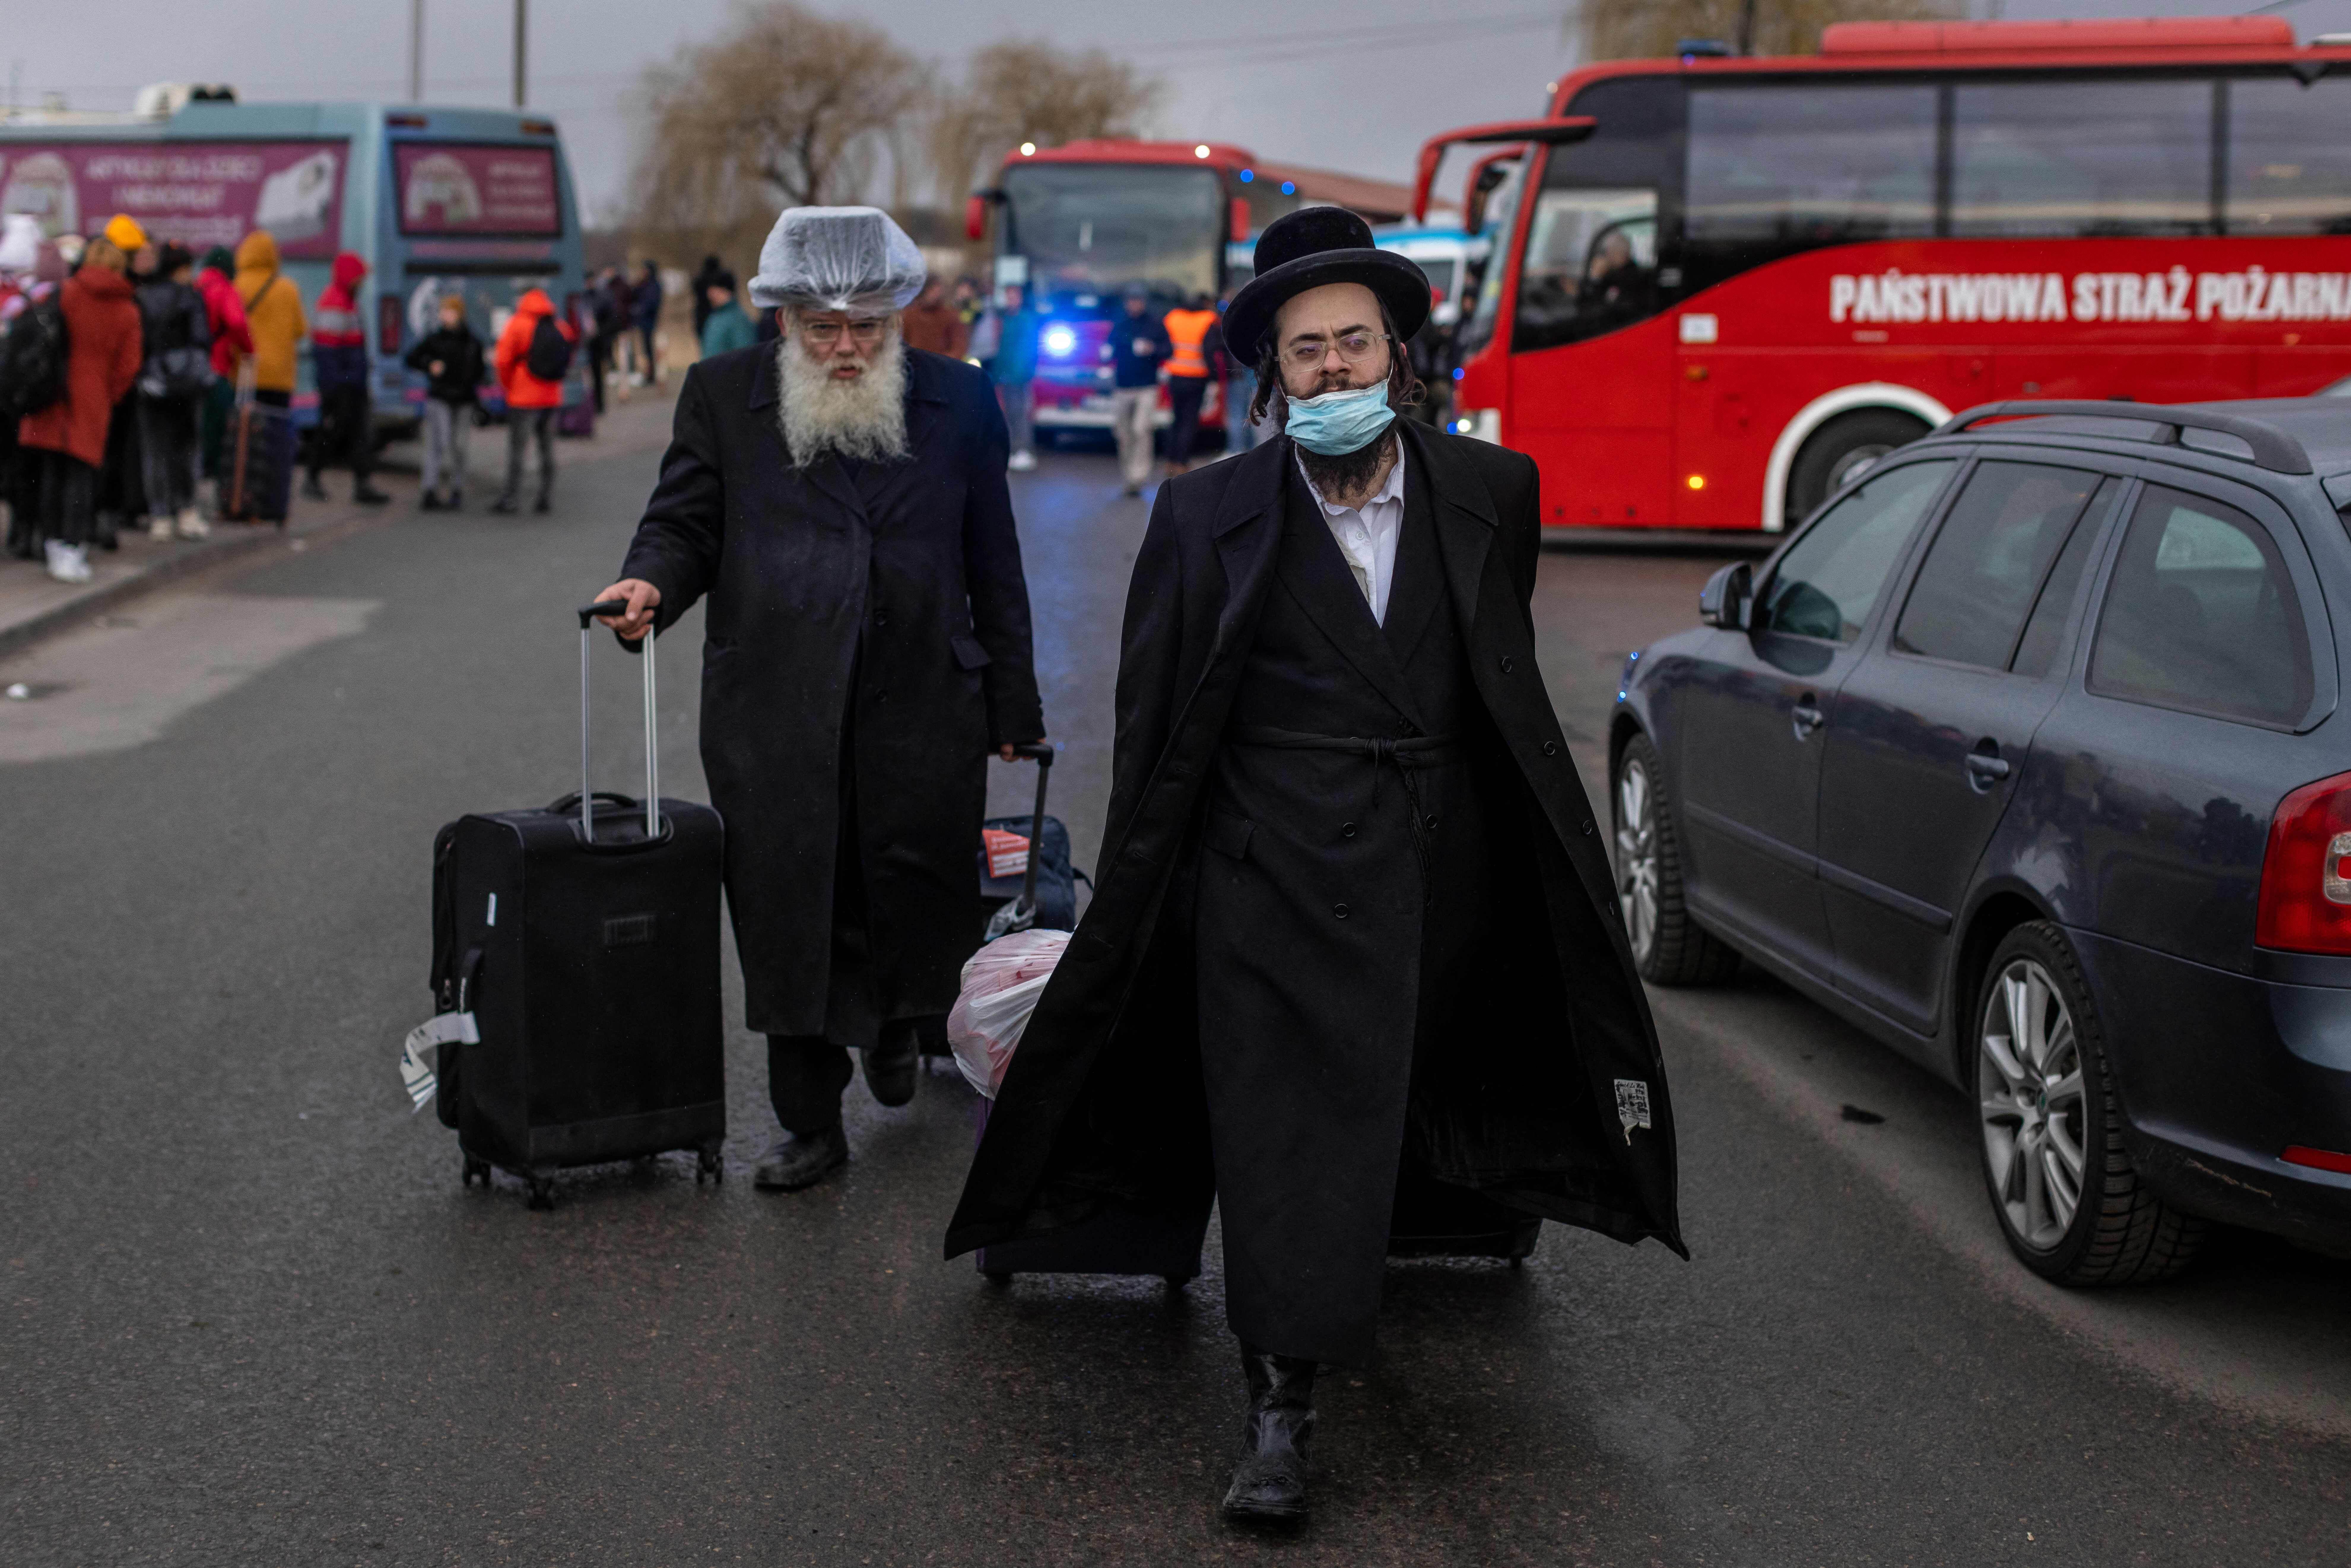 Two Orthodox Jews arrive at the Medyka pedestrian border crossing in eastern Poland on February 25, 2022.